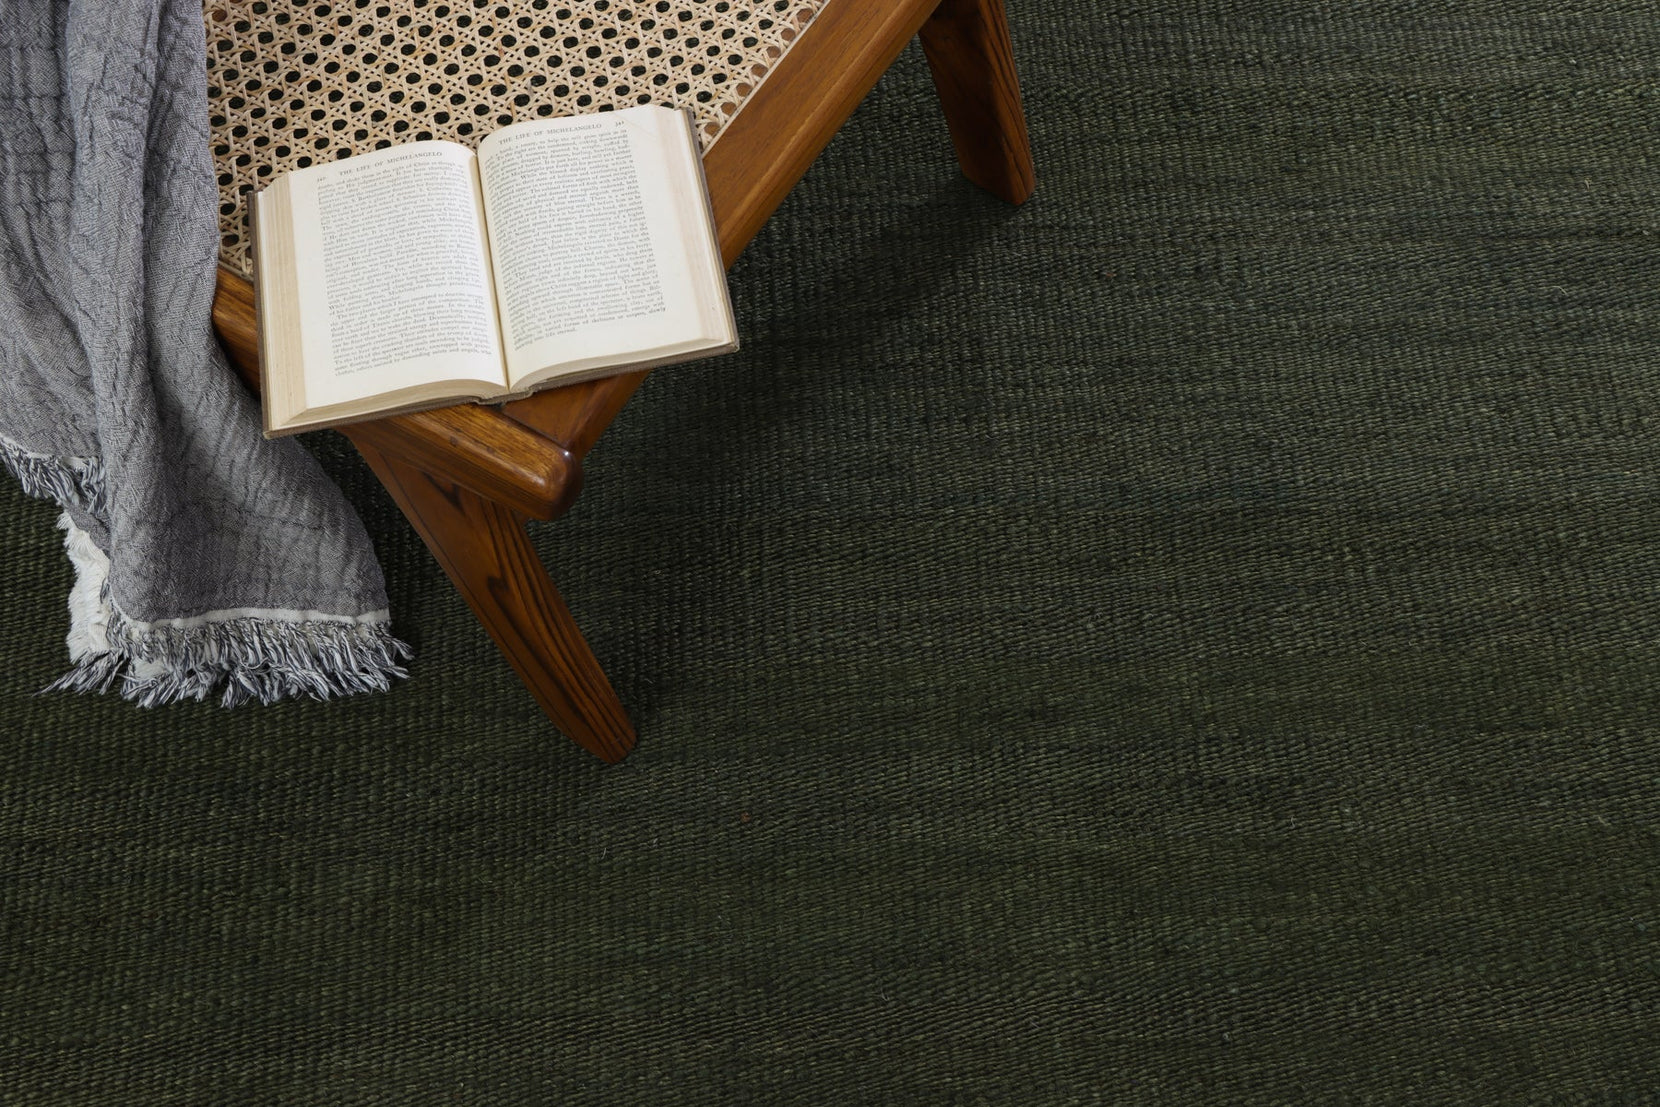 9 Eco-Friendly Jute Rugs For Your Home - The Good Trade